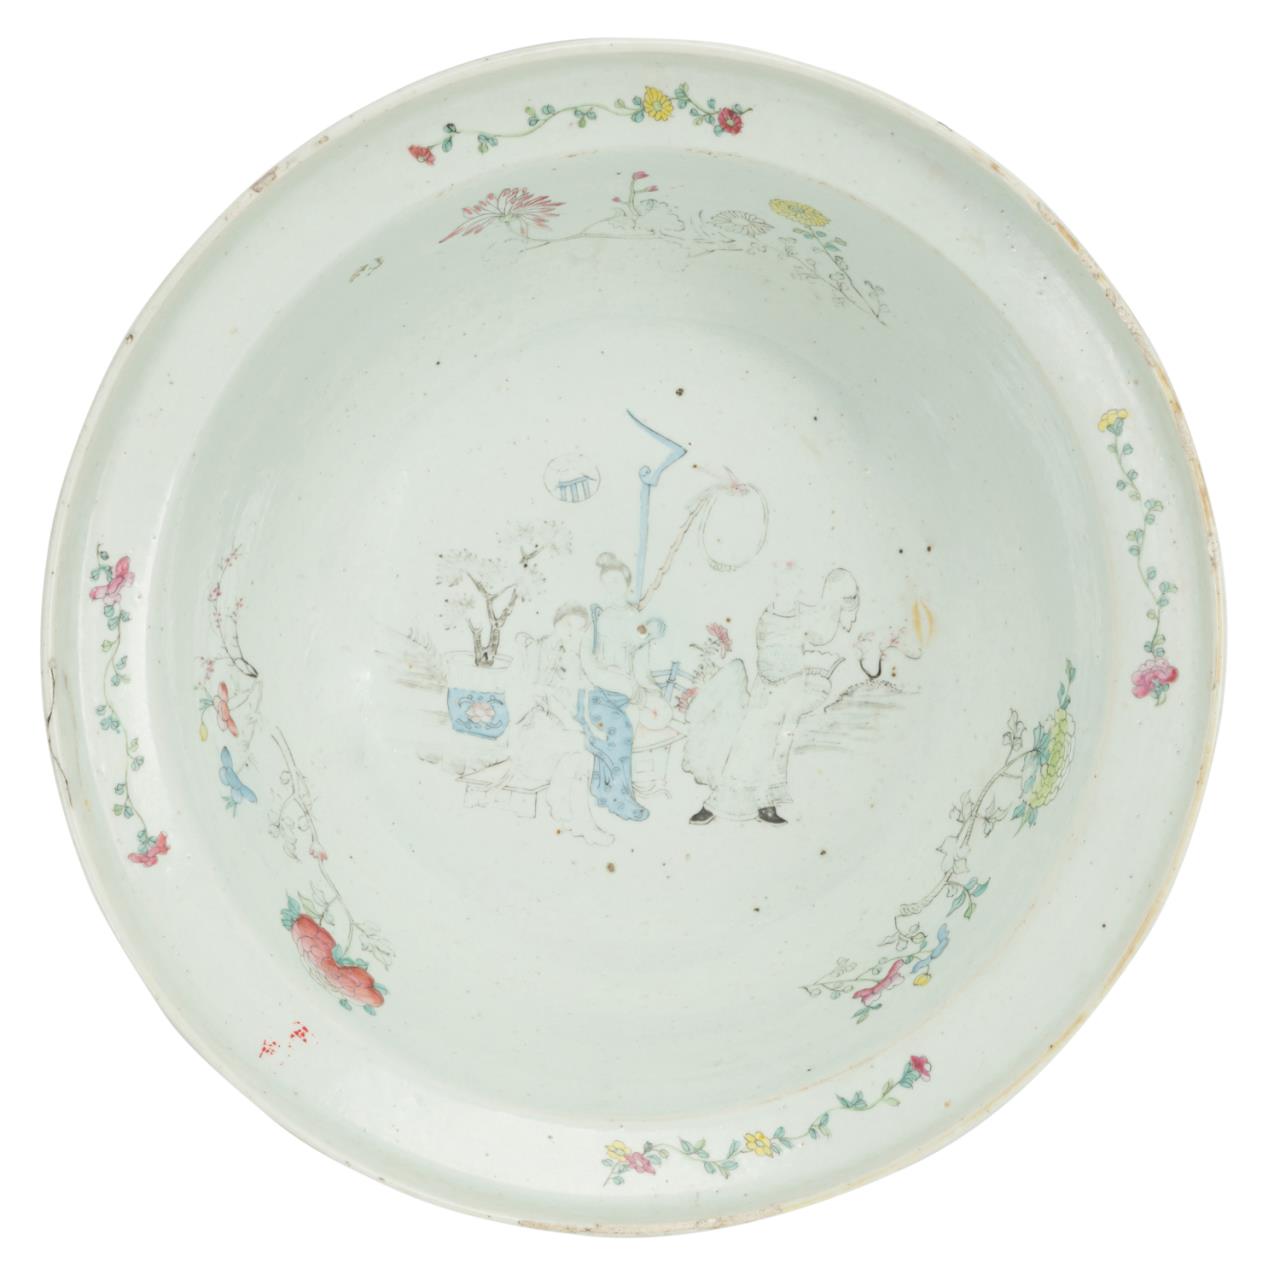 CHINESE FAMILLE ROSE PORCELAIN 2f960a